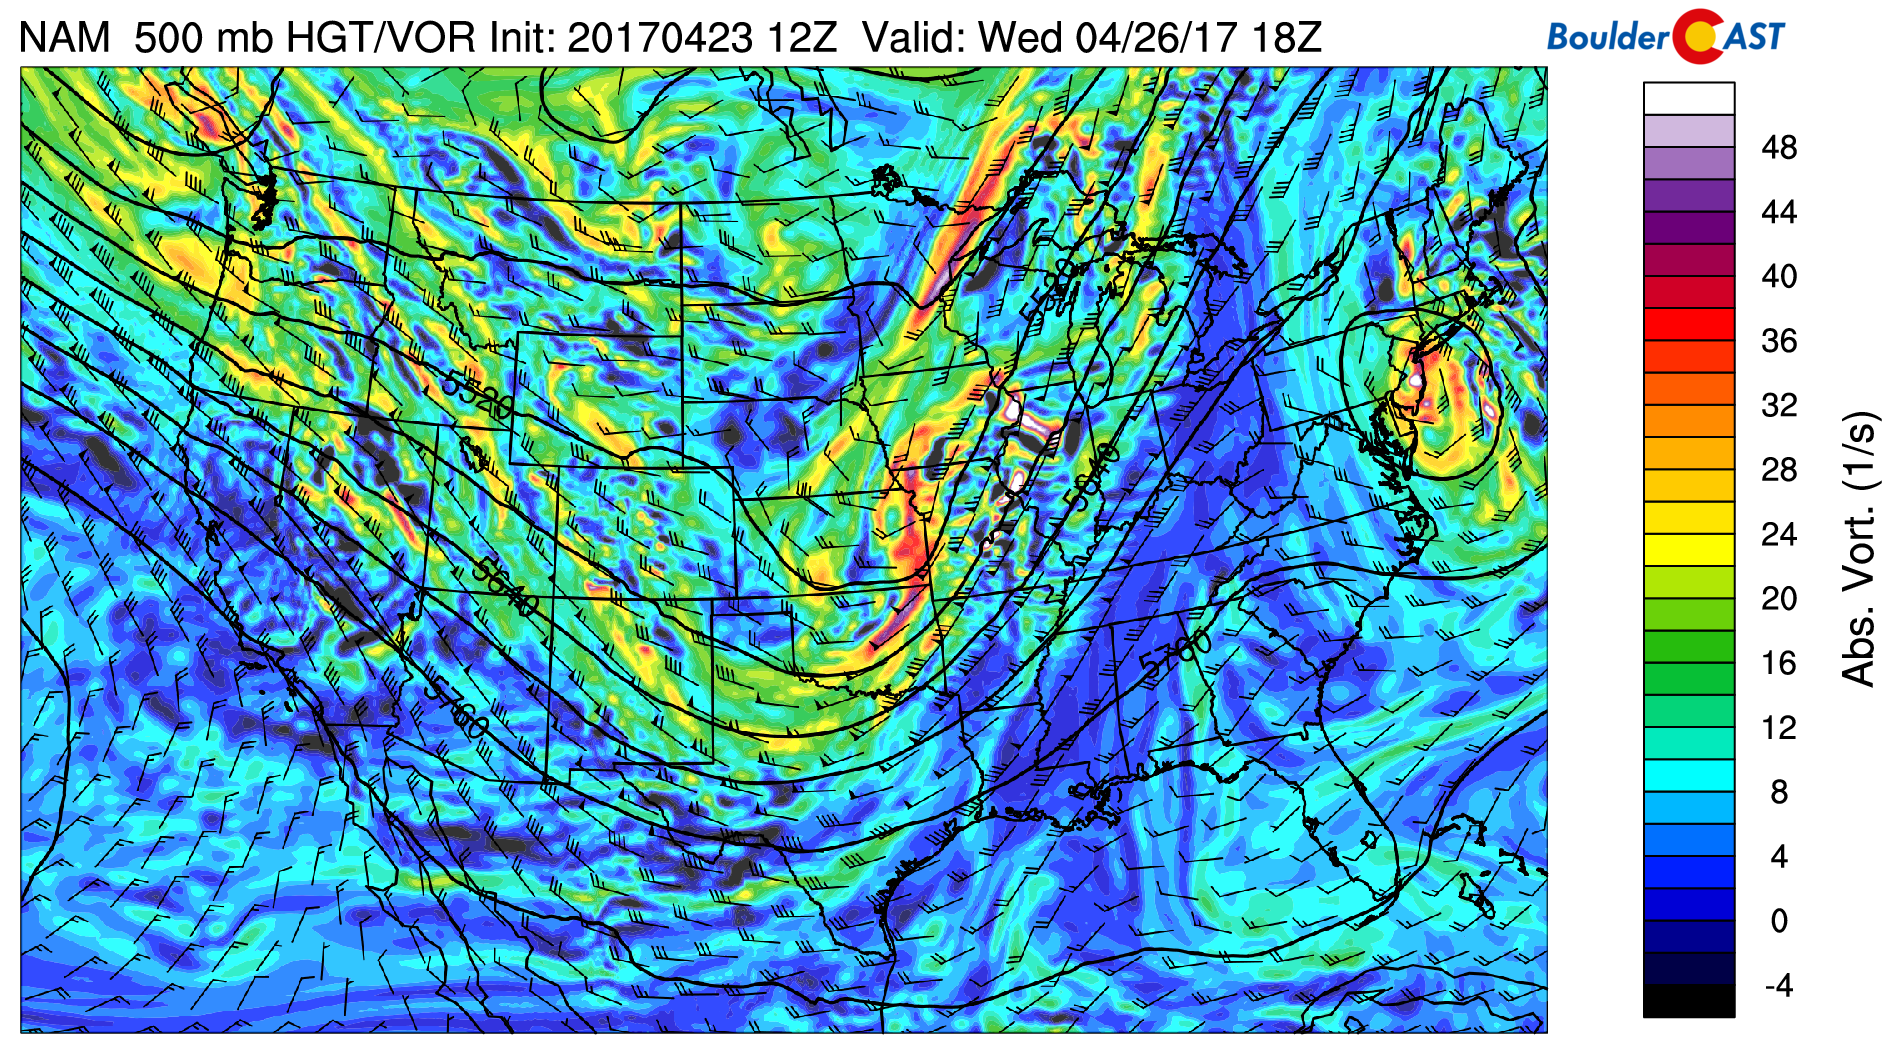 NAM 500 mb absolute vorticity for Wednesday